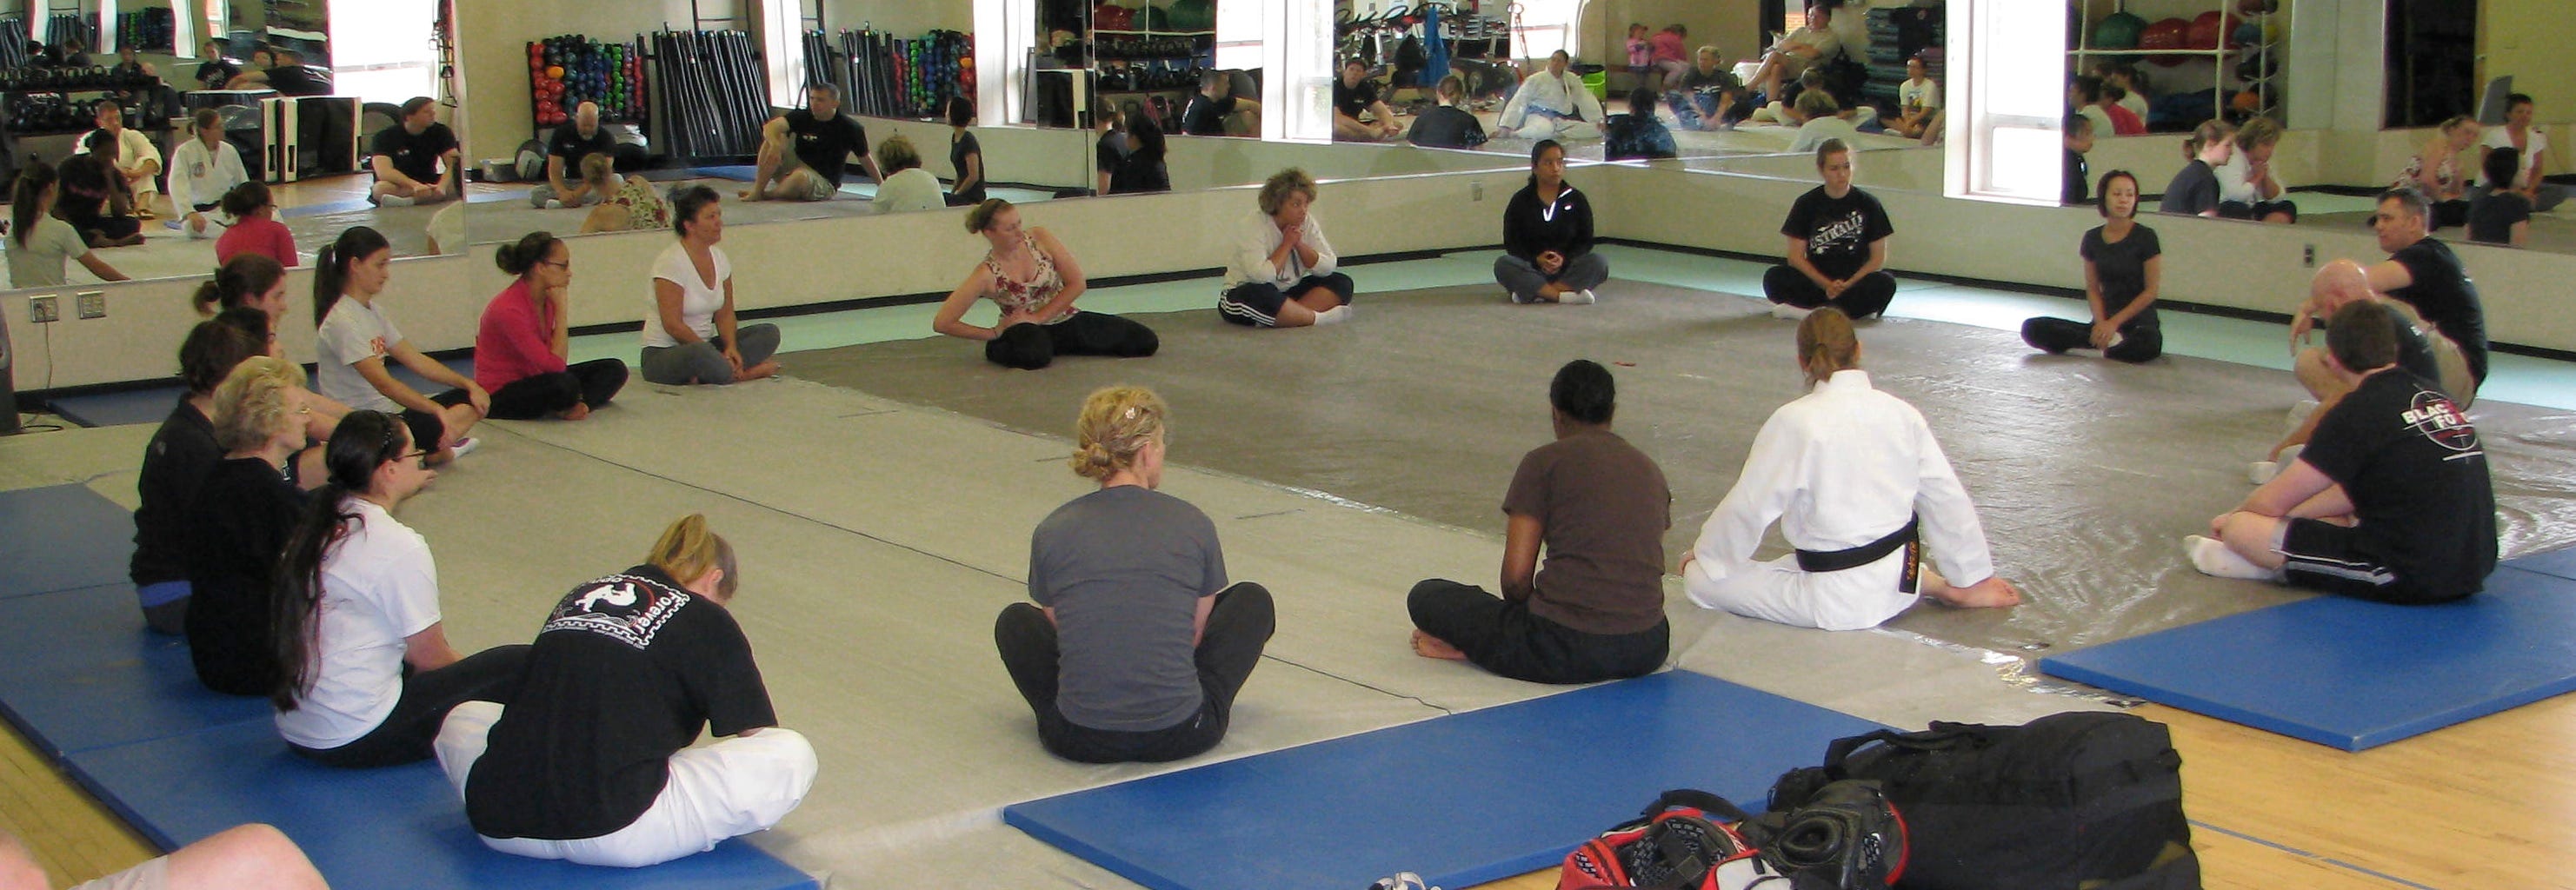 BJJ students performing stretching exercises